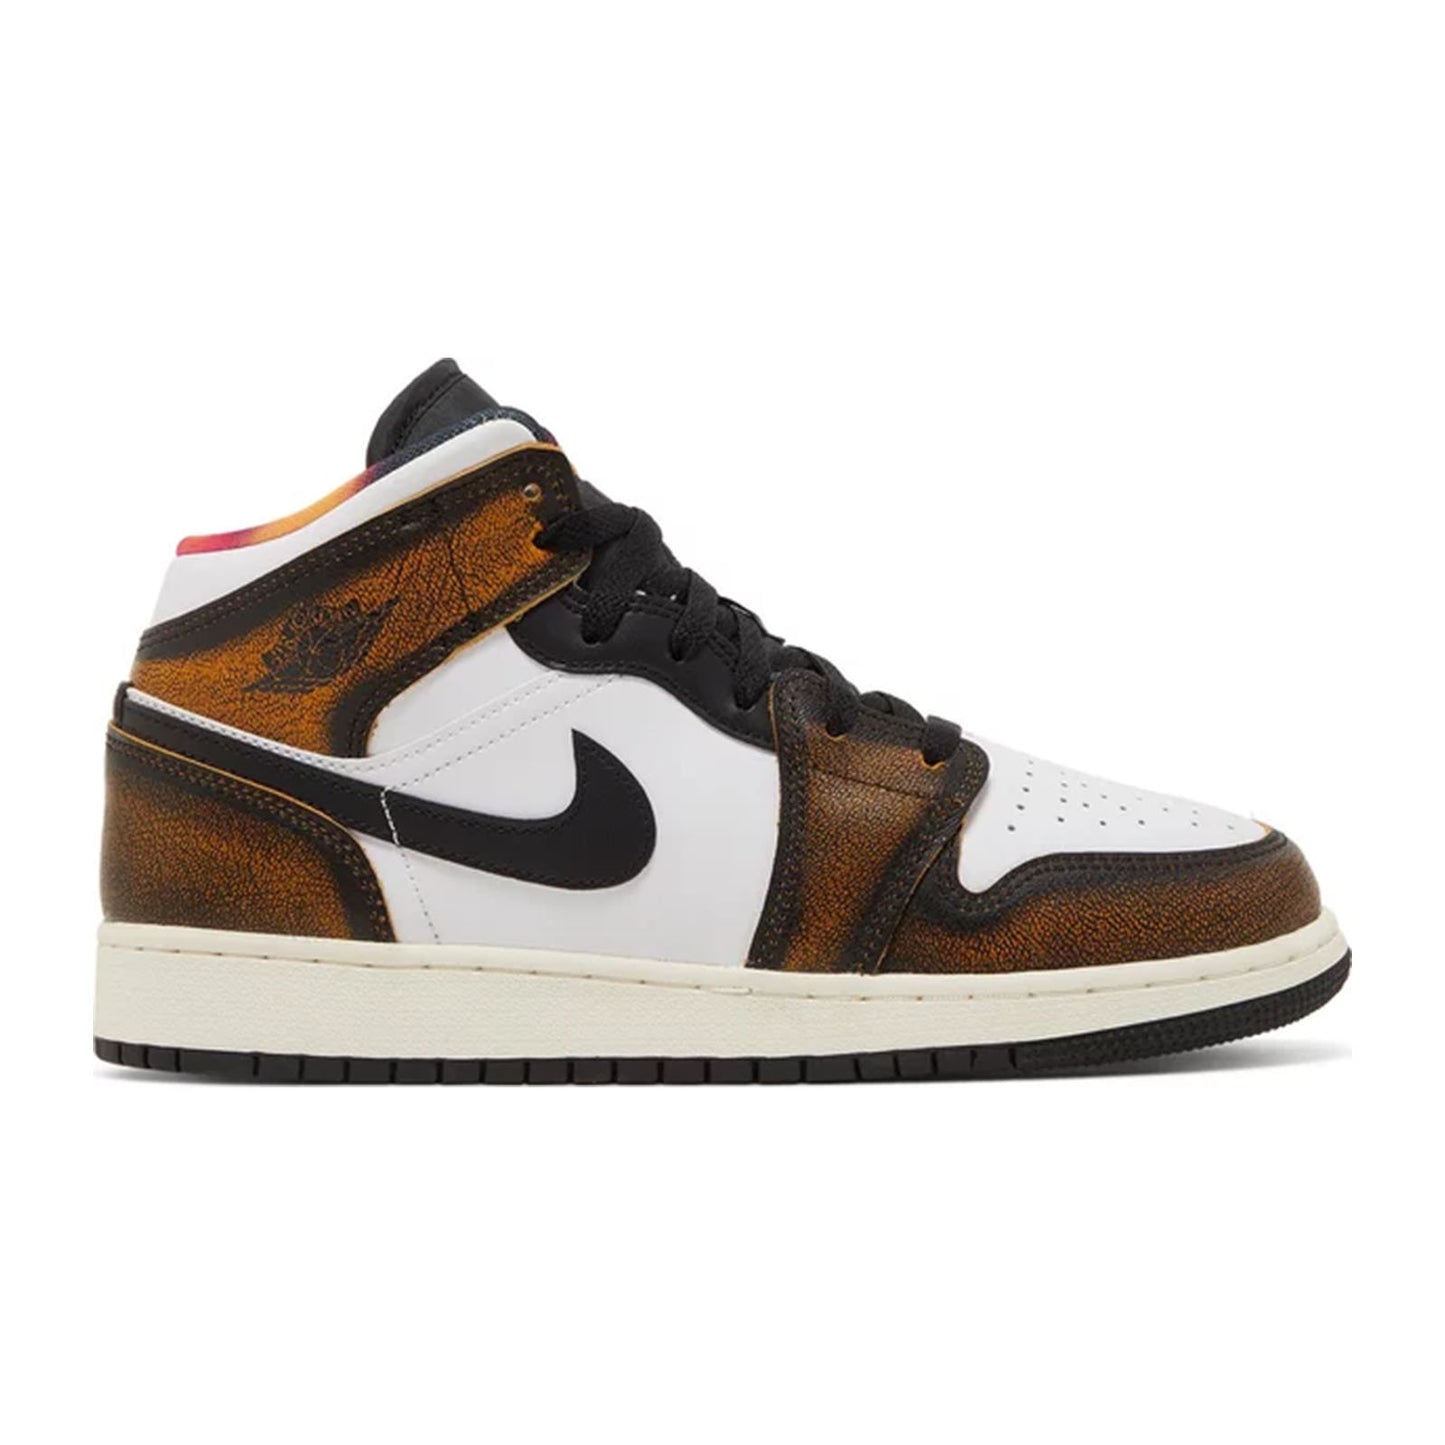 Air where to buy jordan 1 mid inside out (GS), Wear Away Taxi